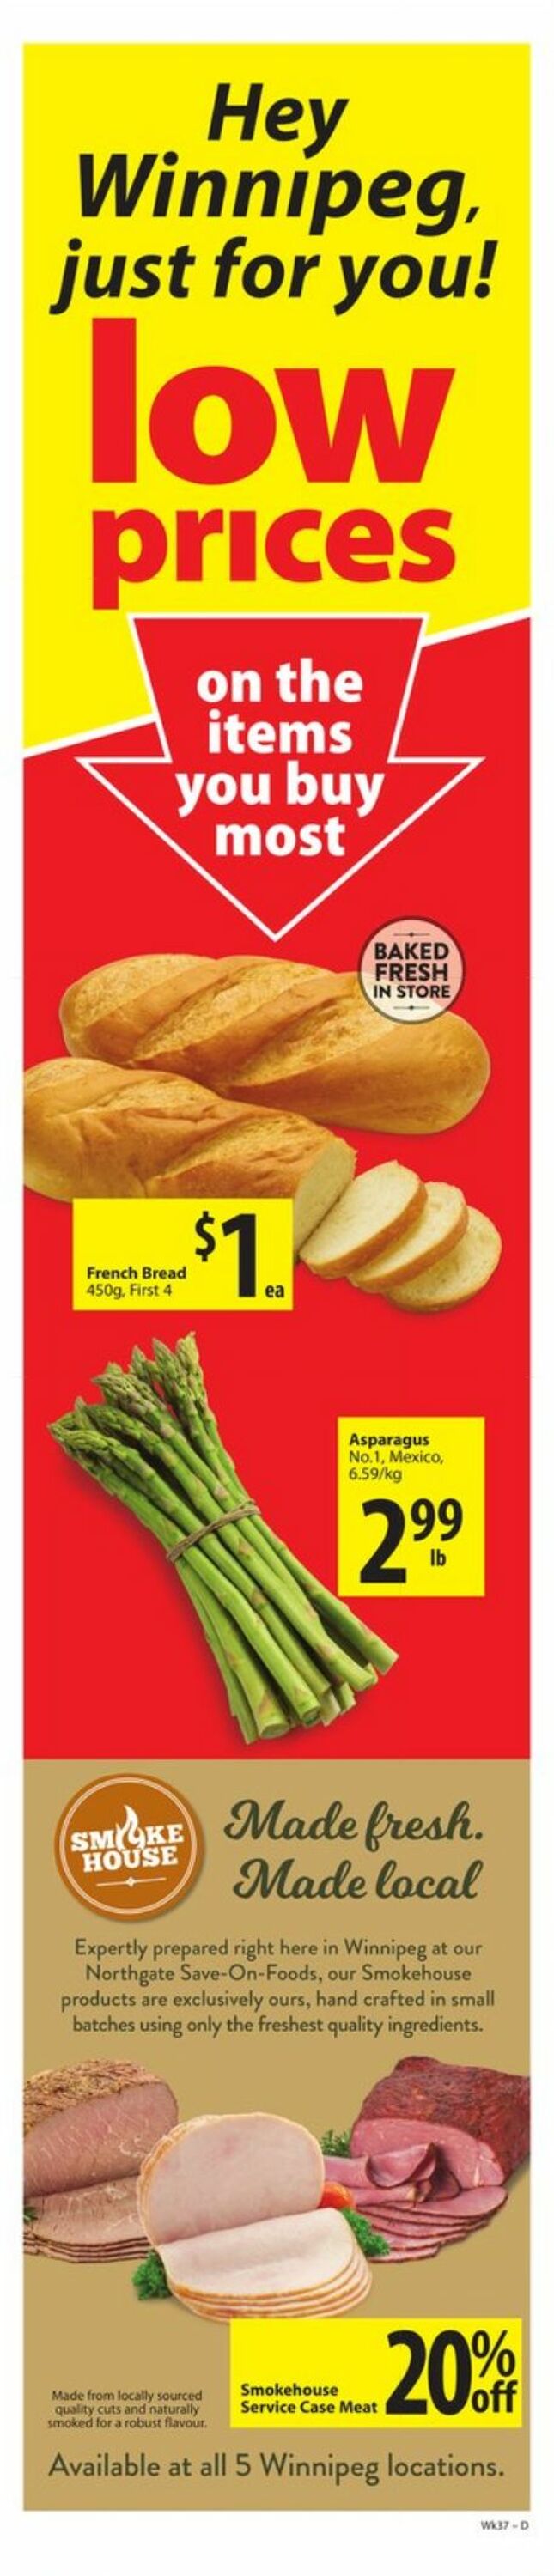 Circulaire Save-On-Foods 08.09.2022 - 14.09.2022